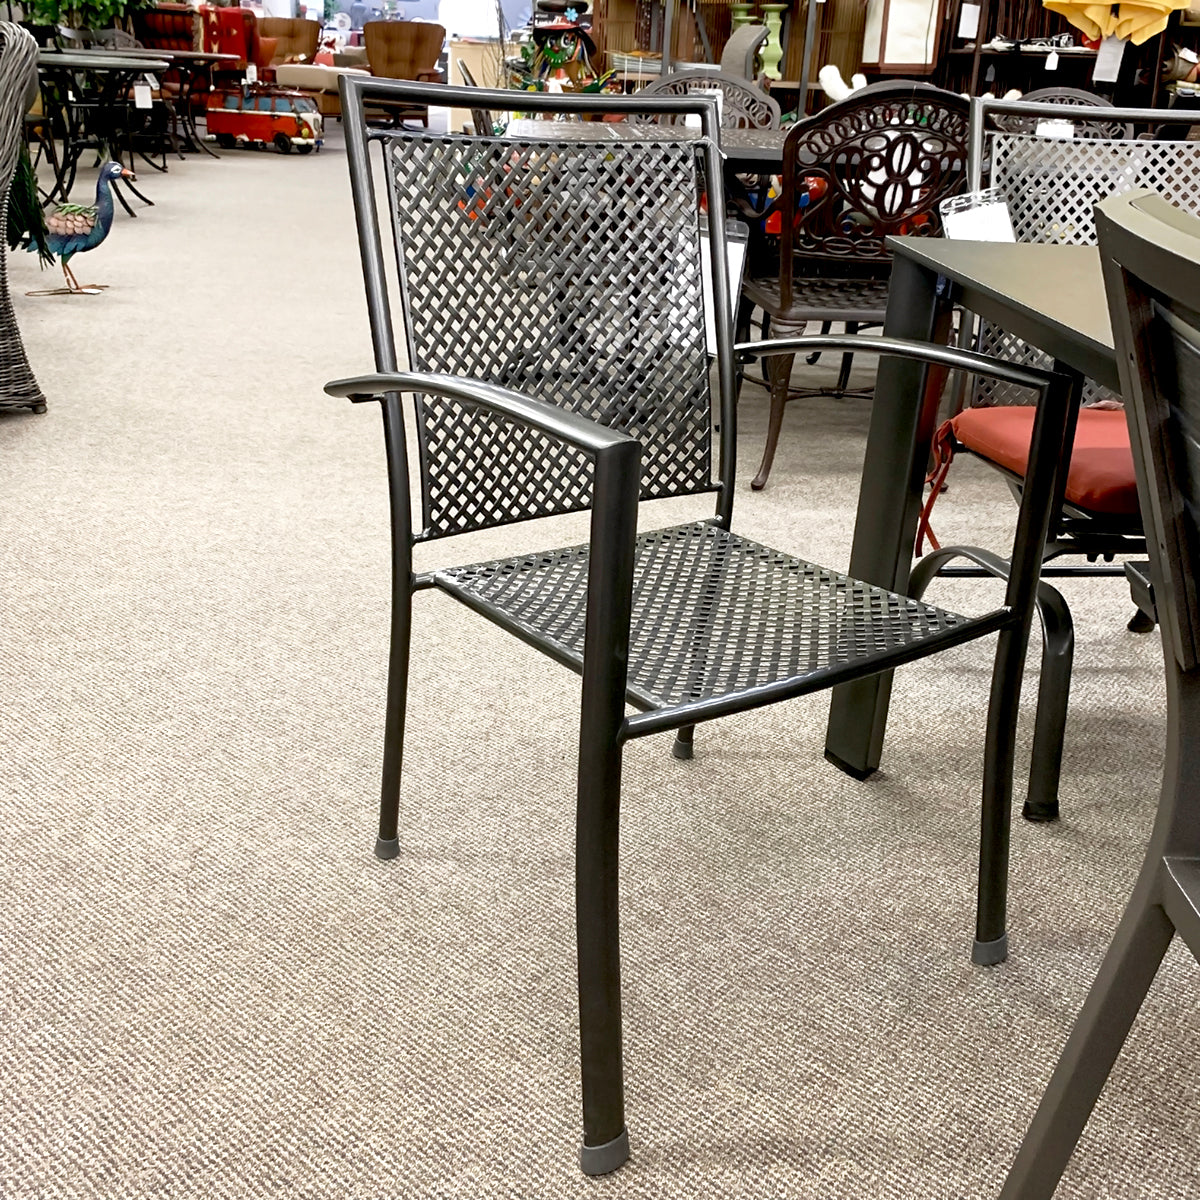 Reno Patio Dining Arm Chair is available at Jacobs Custom Living Spokane Valley showroom.